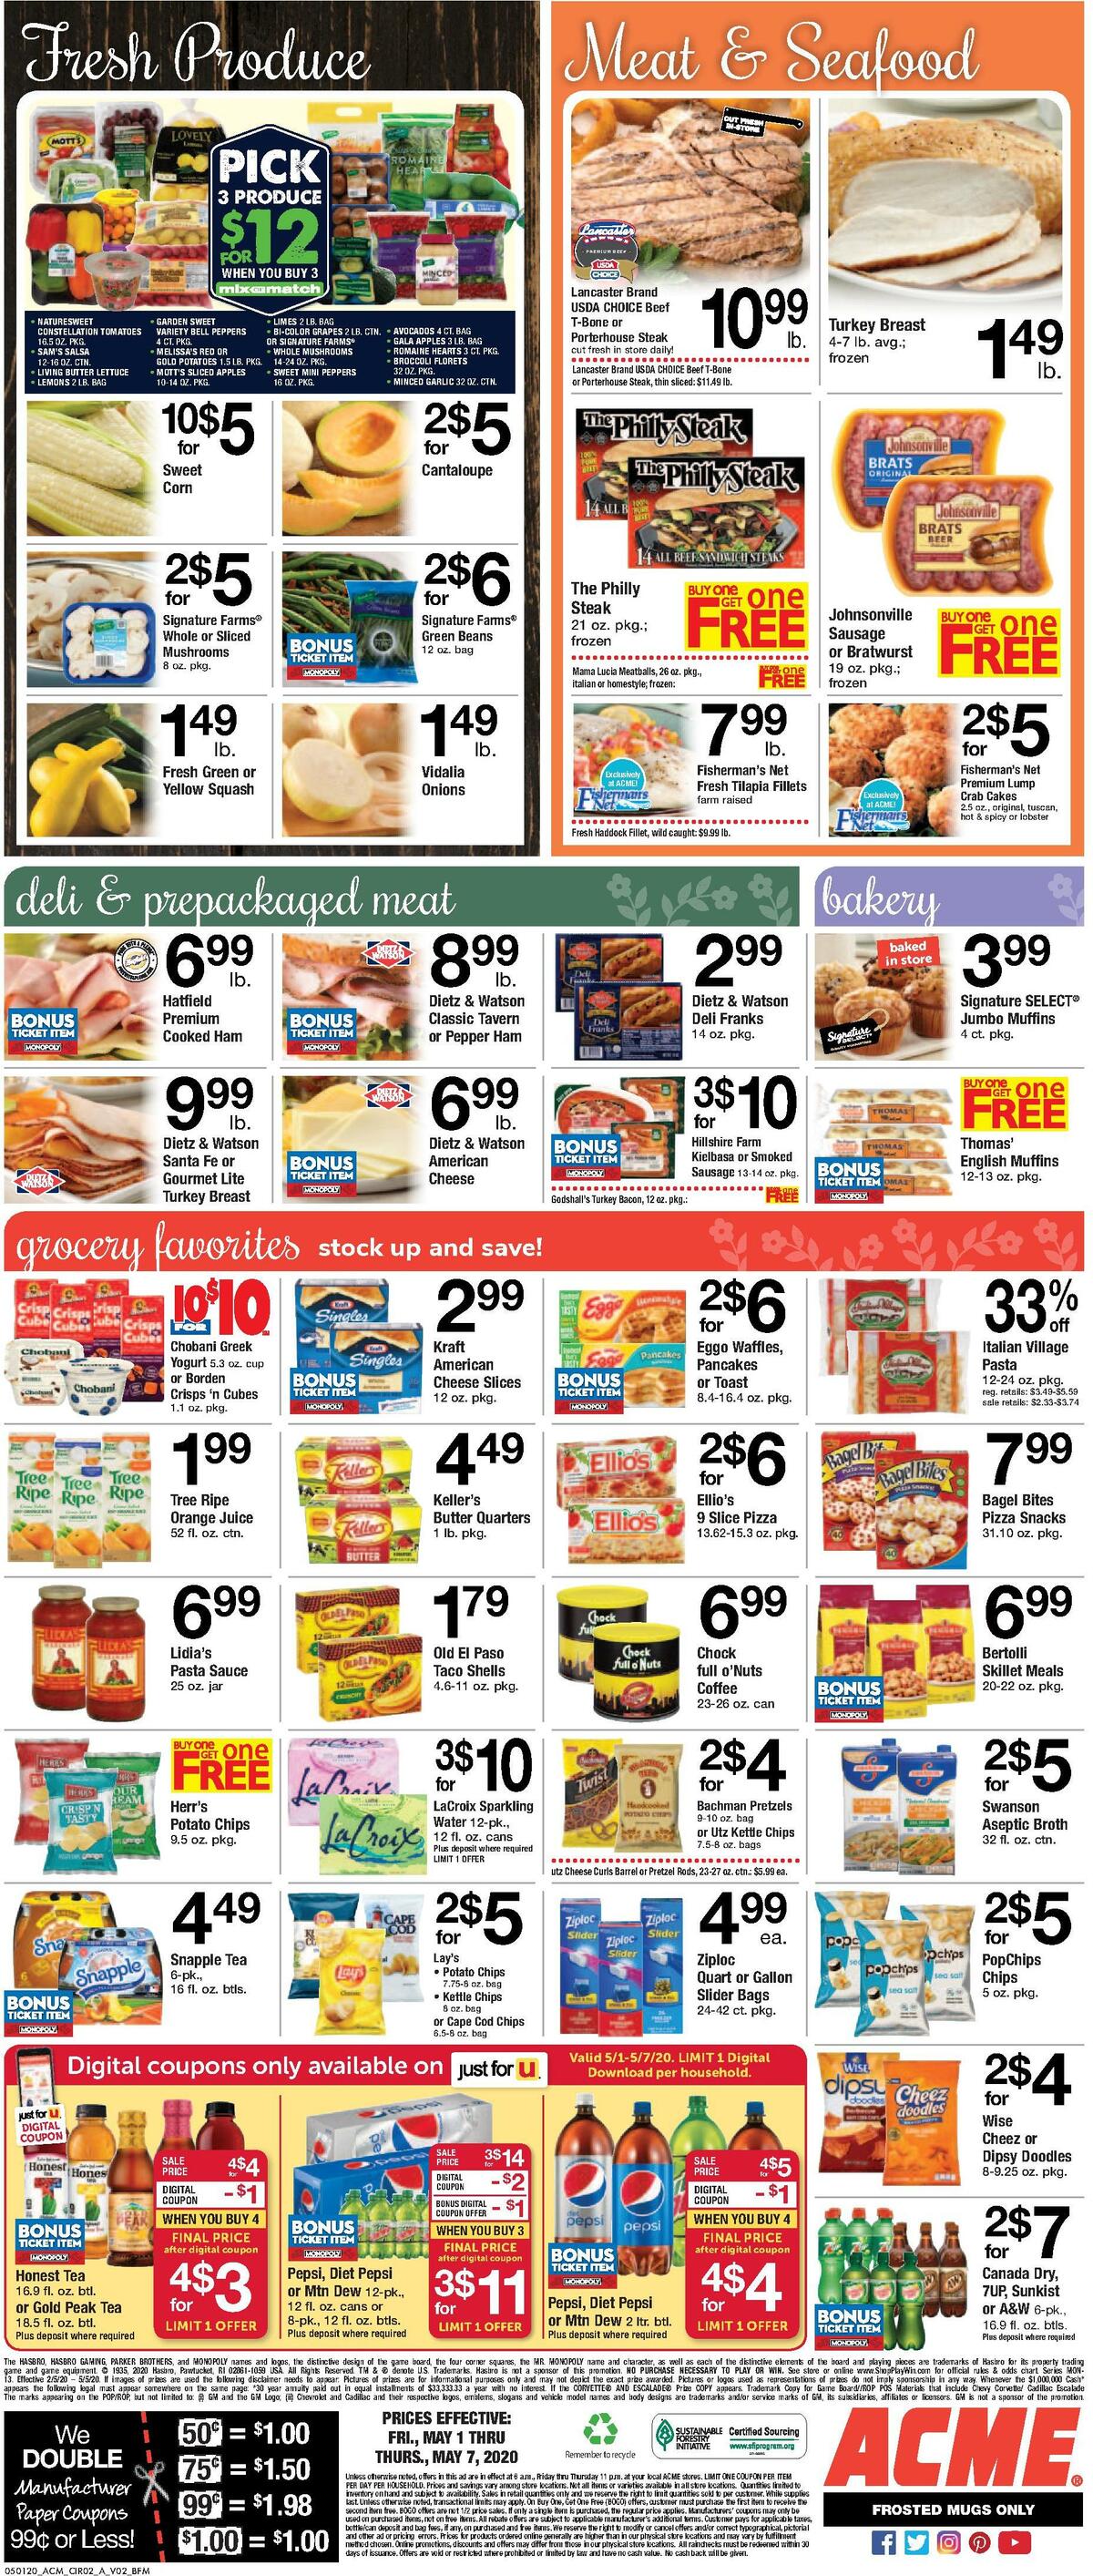 ACME Markets Weekly Ad from May 1